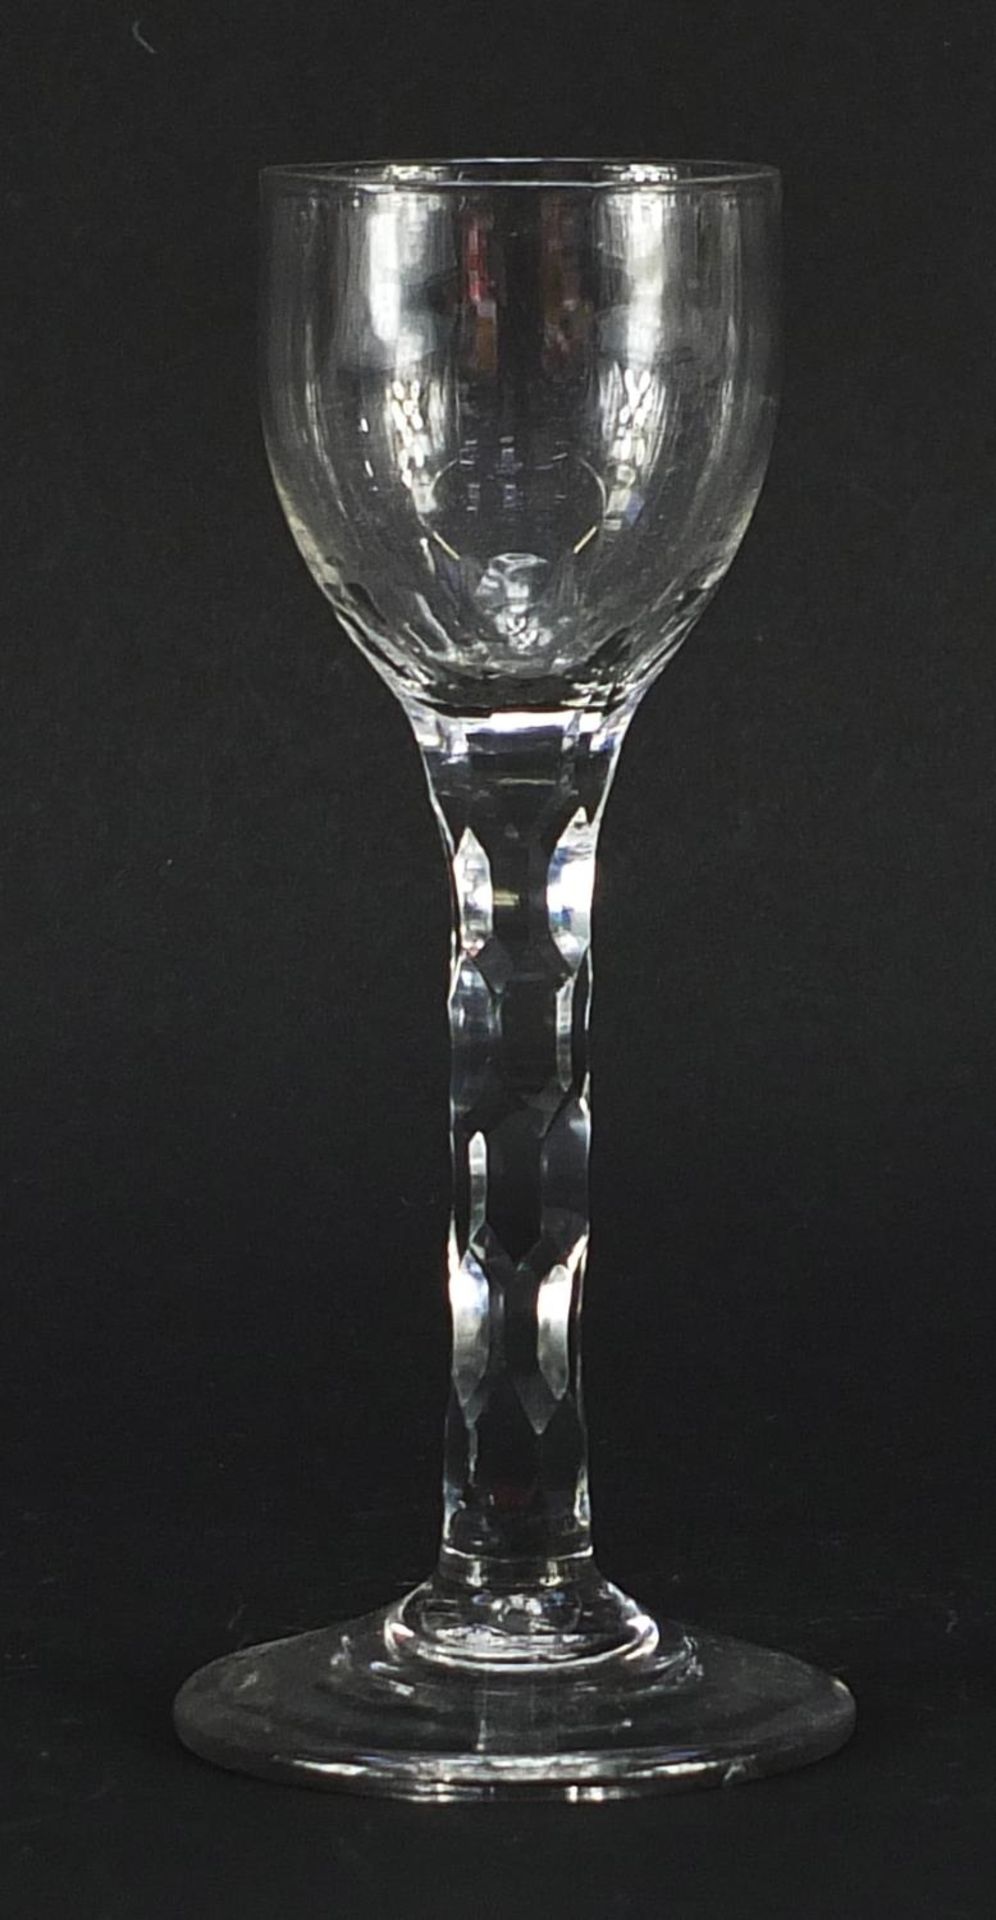 18th century wine glass with facetted stem, 15.5cm high - Image 2 of 3